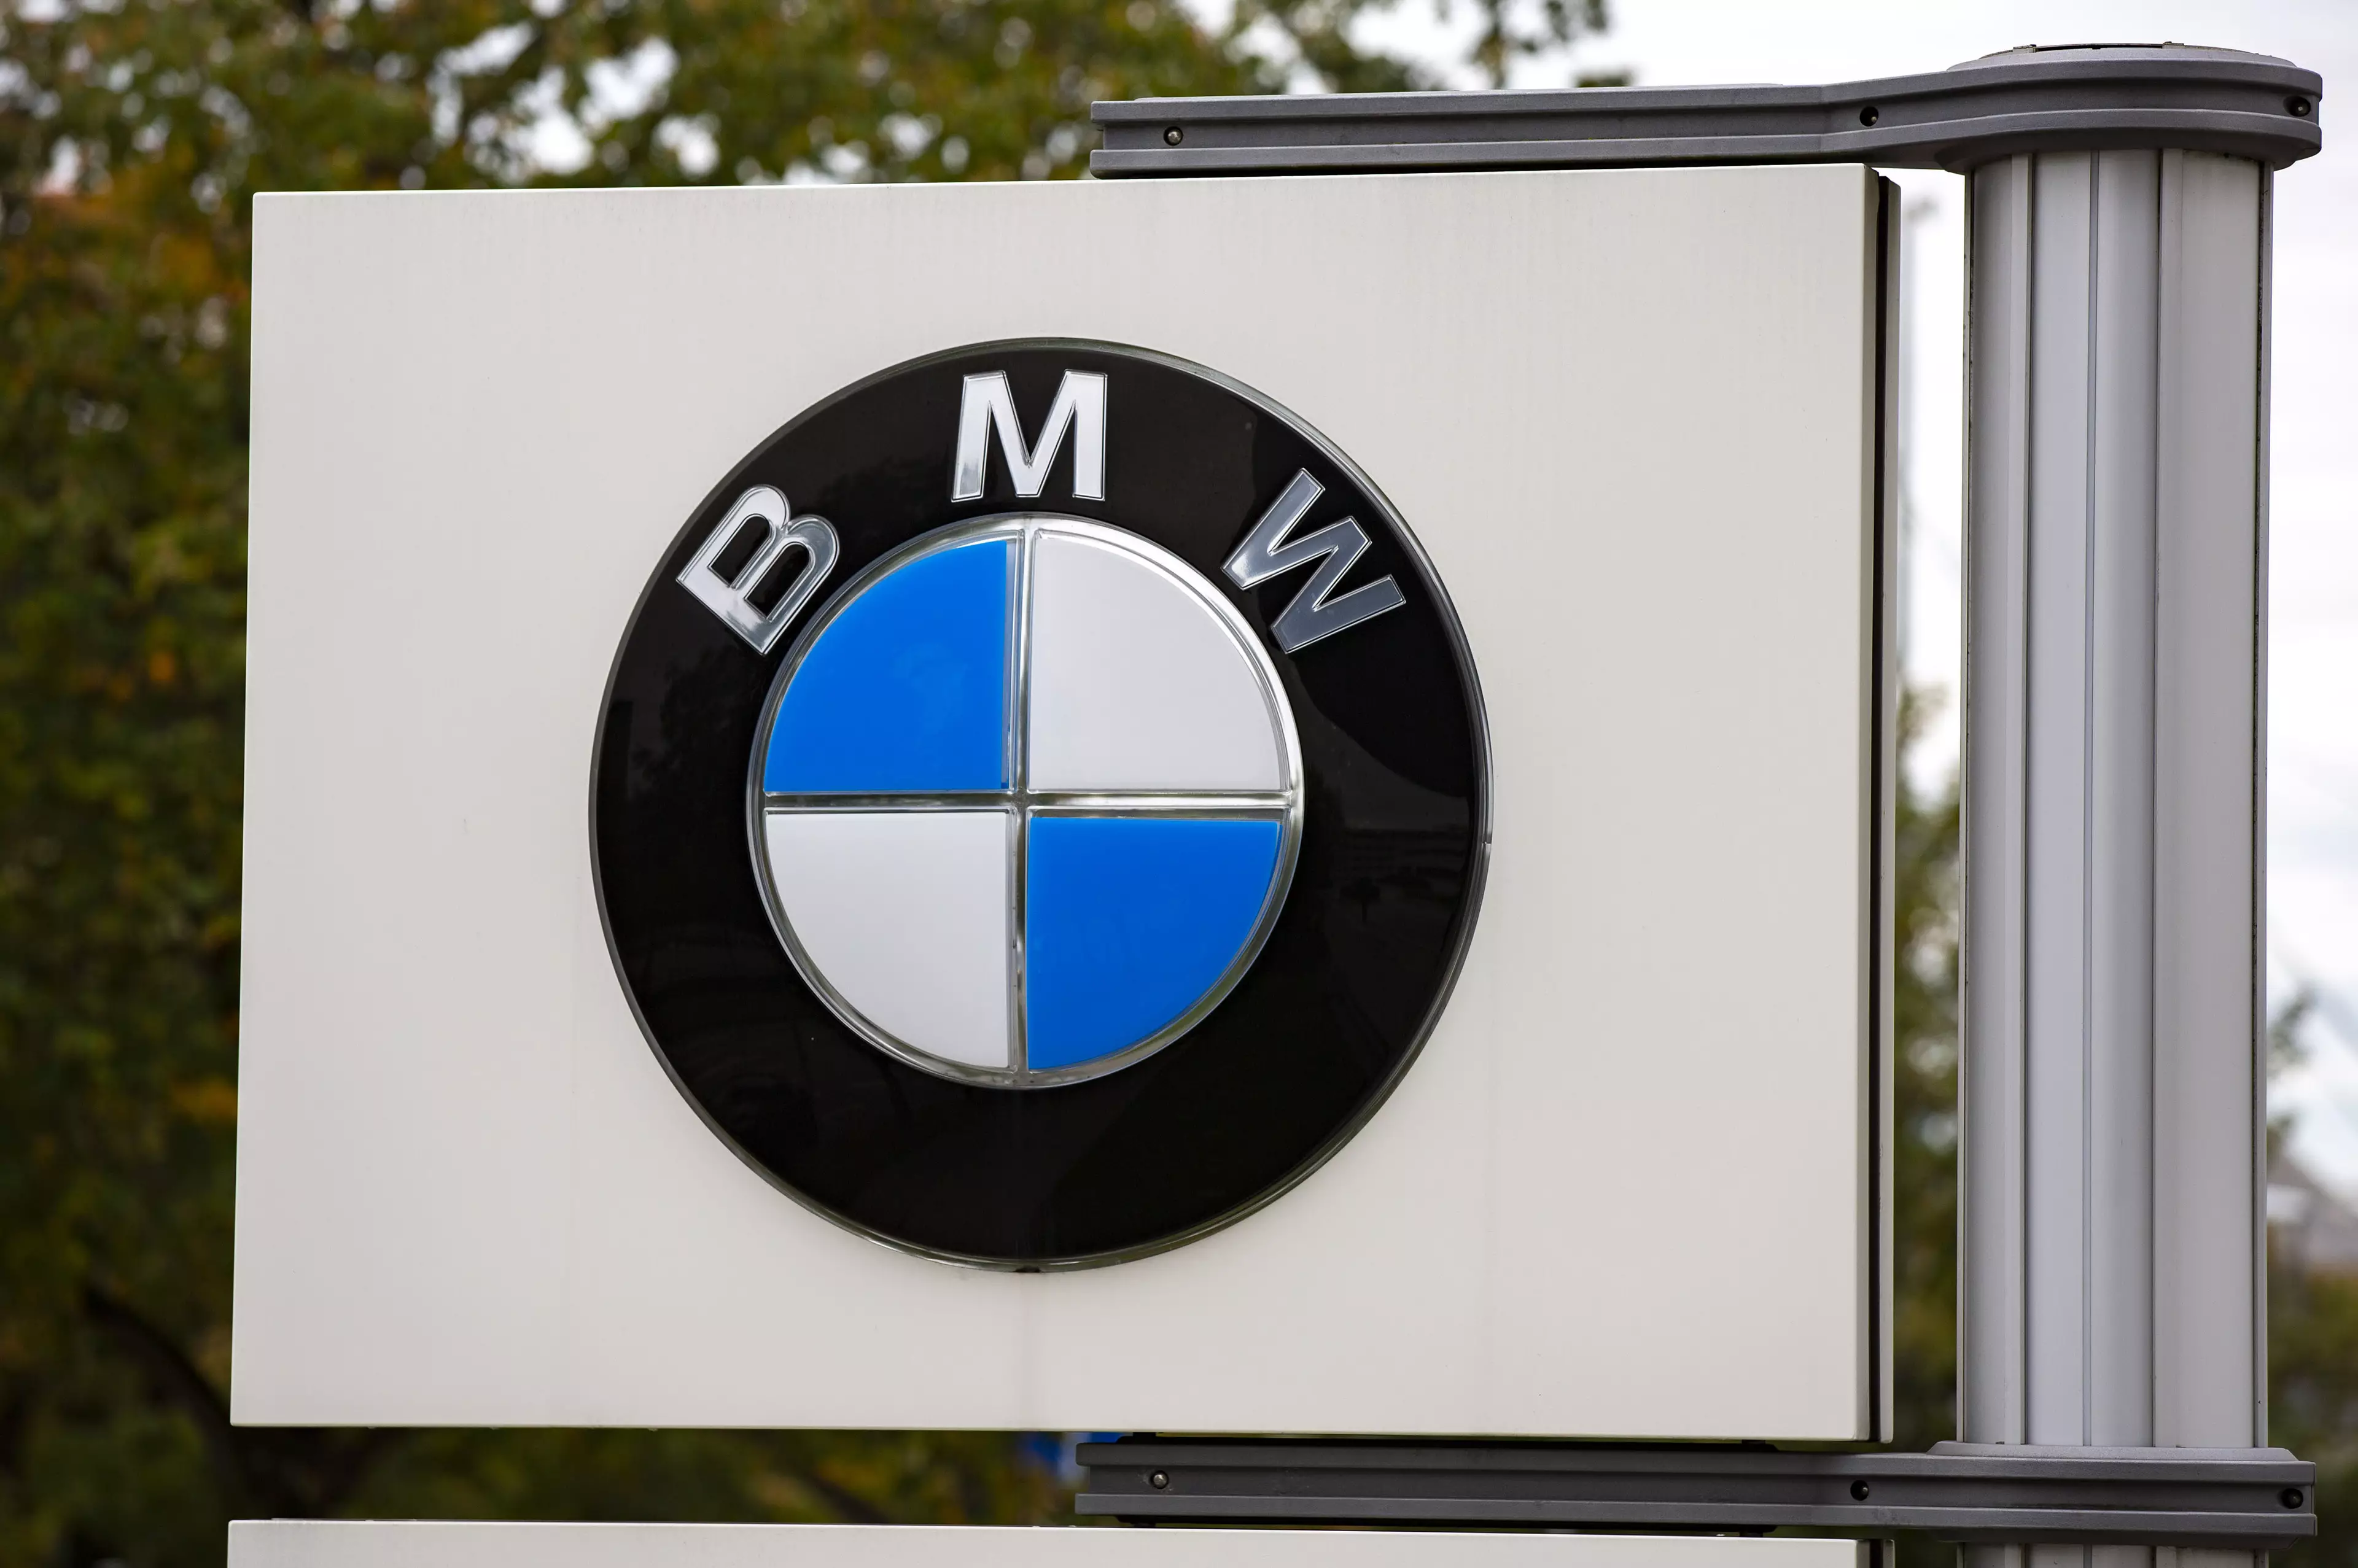 BMW had to recall almost double as many cars a few years ago.